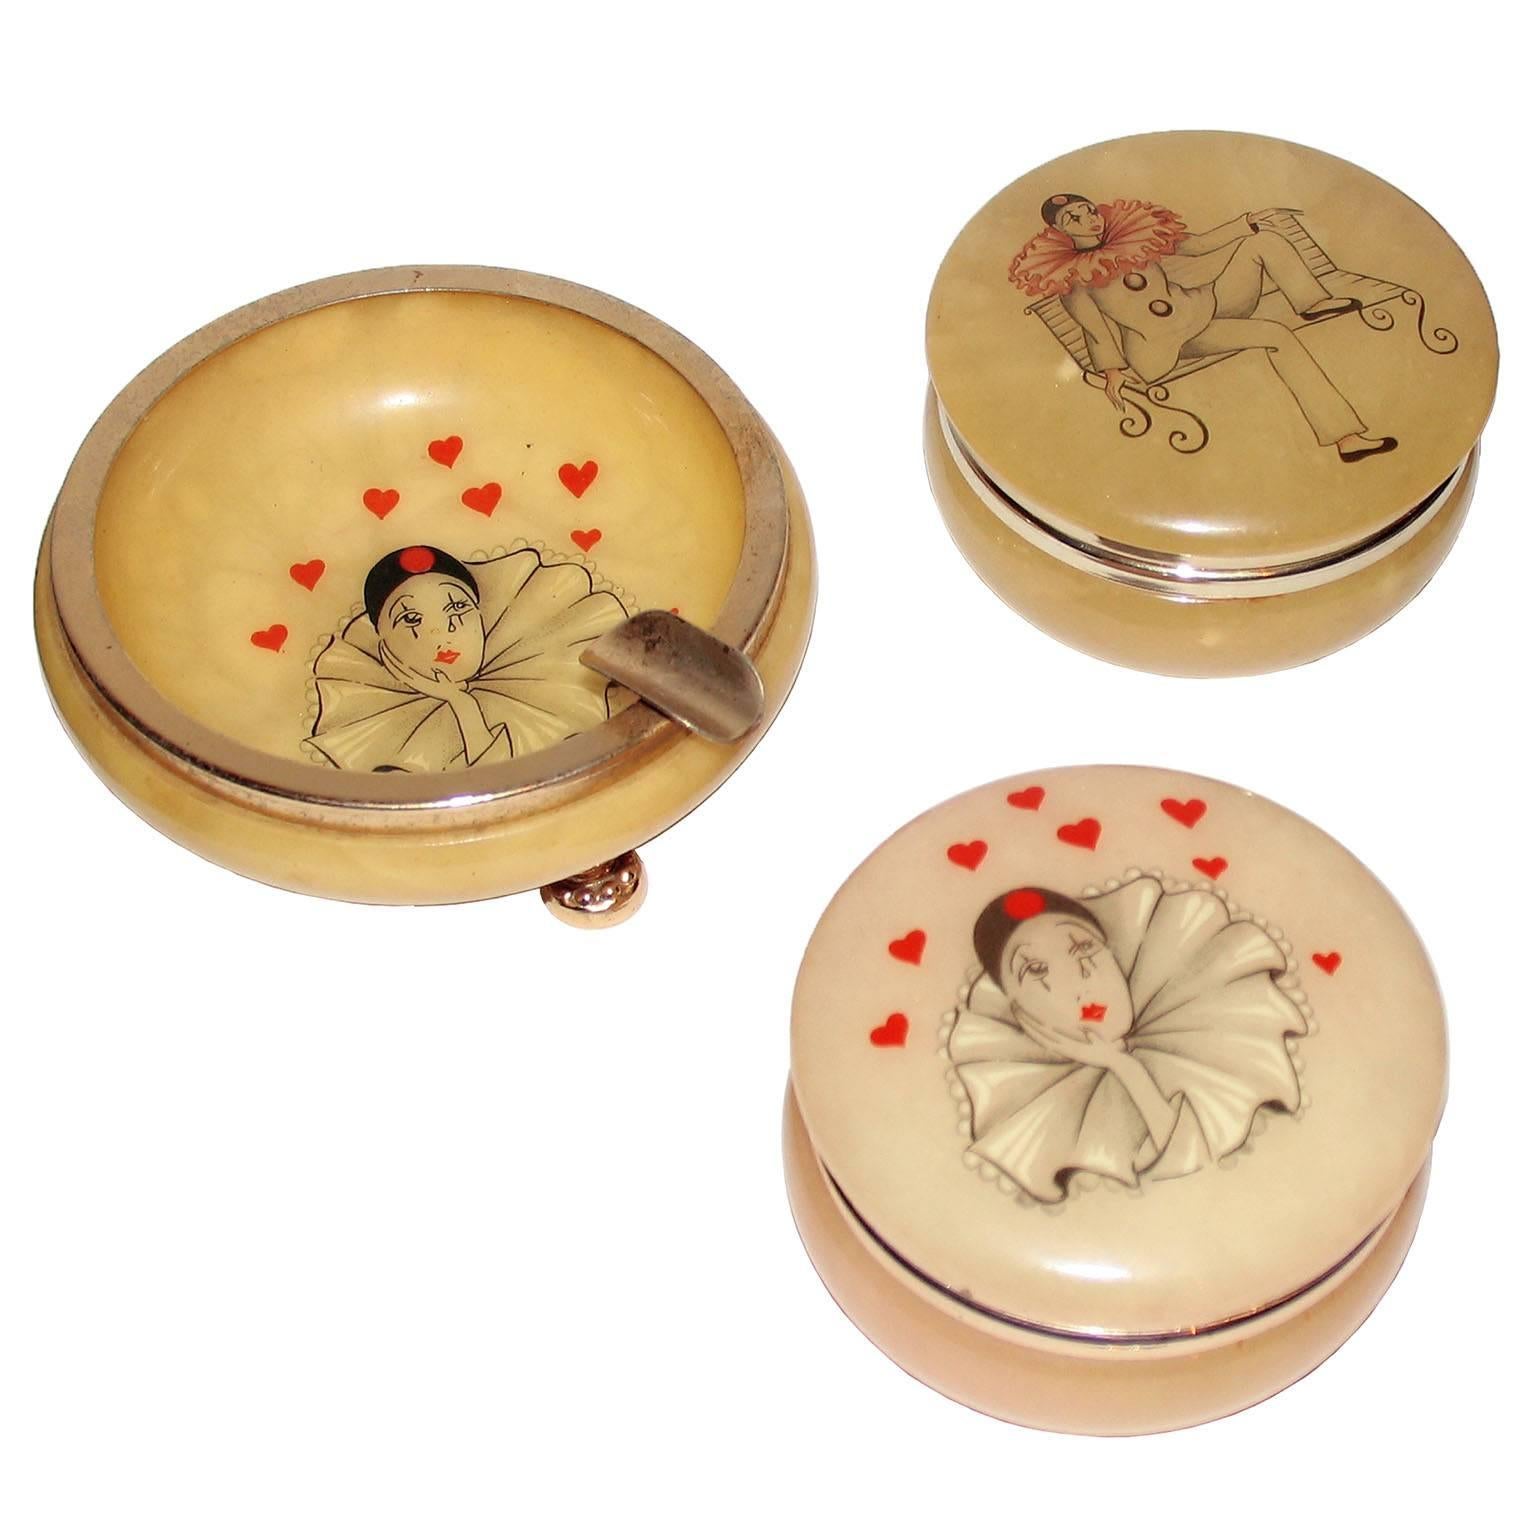 Alabaster Jewelry Boxes and Ashtray